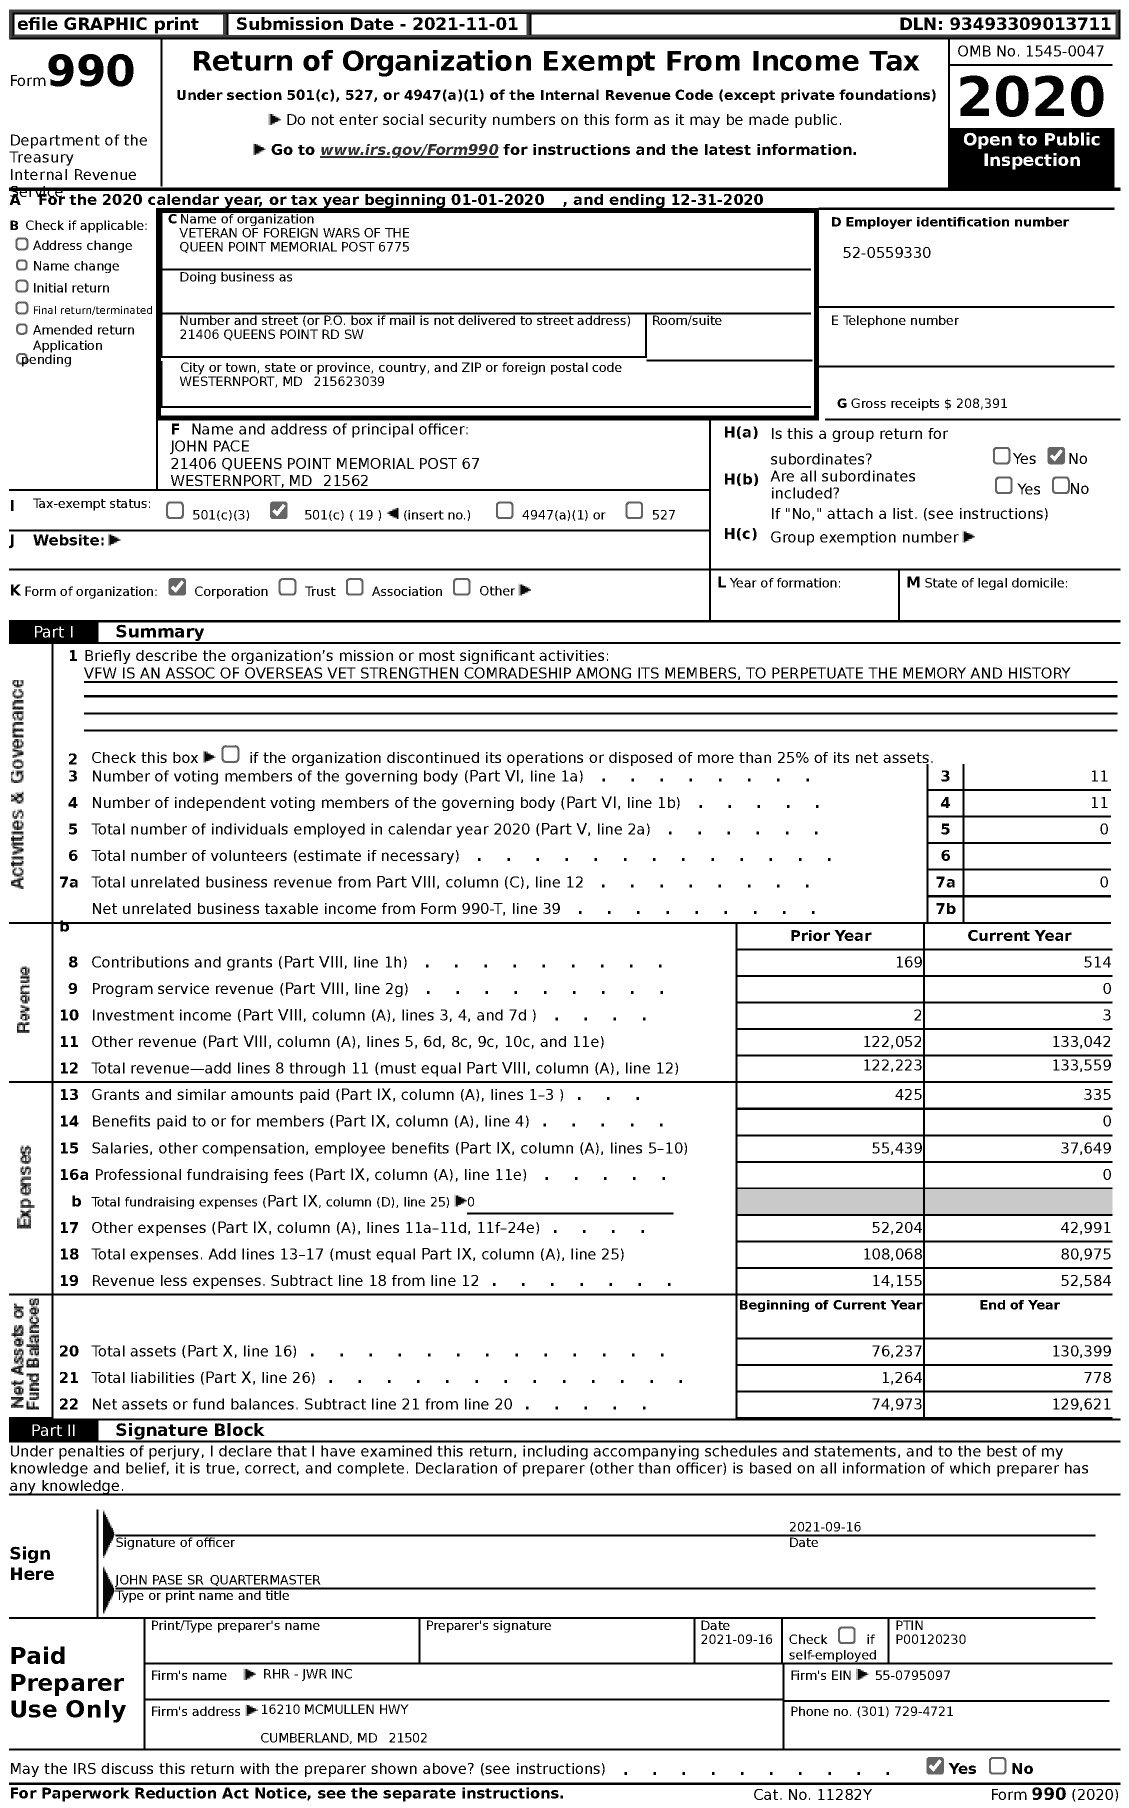 Image of first page of 2020 Form 990 for VFW Department of Maryland - Queen Point Memorial Post 6775